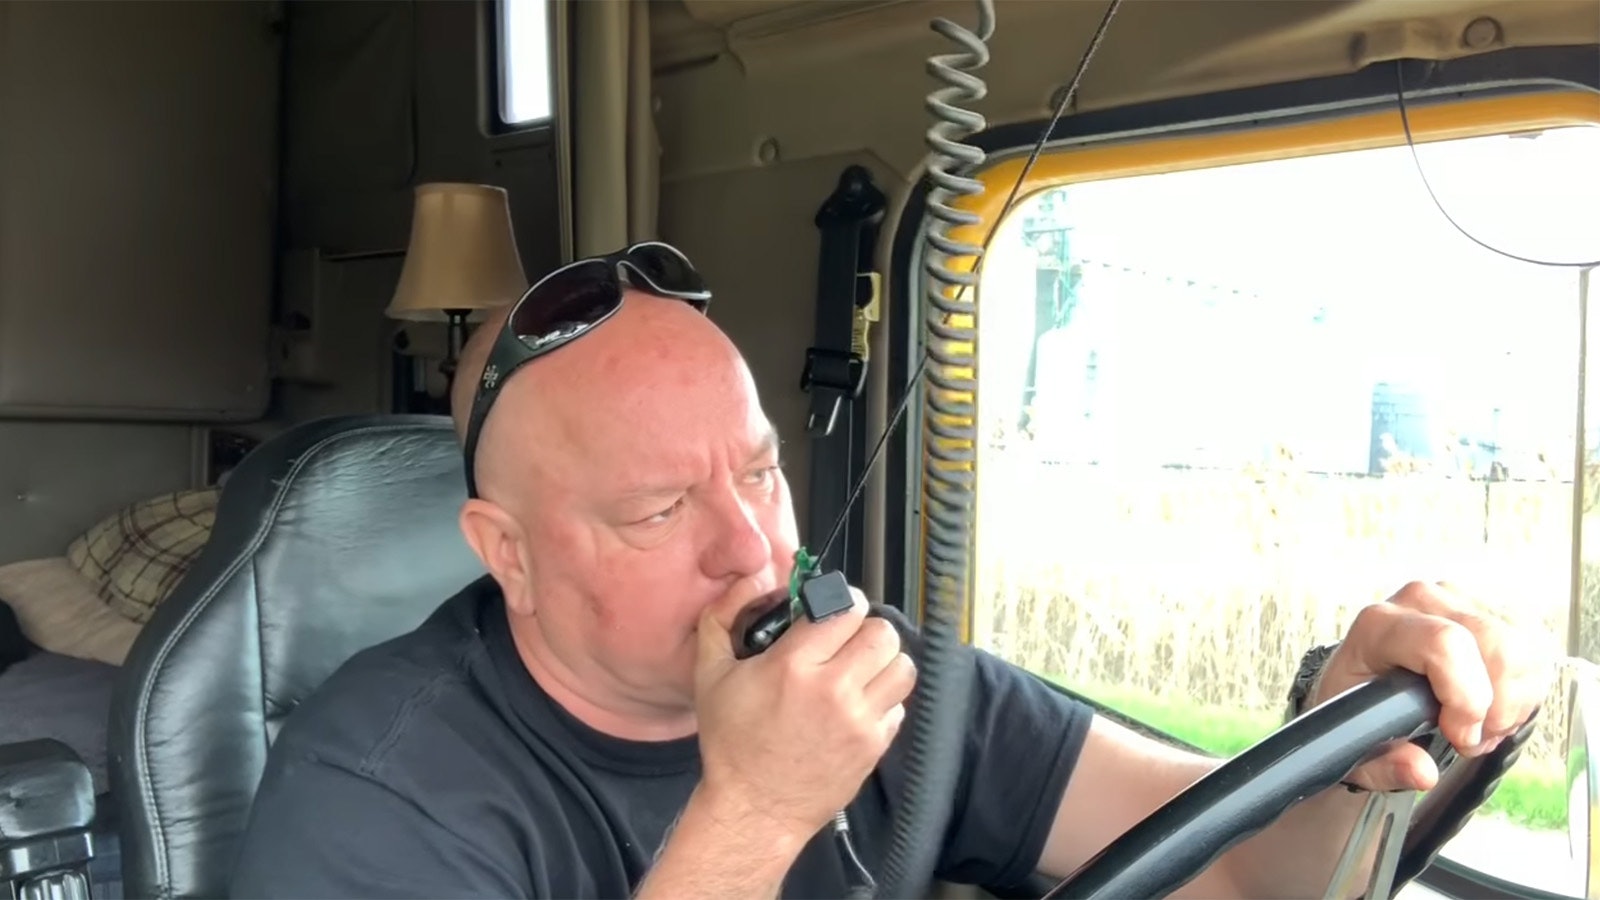 Grant Brown, who has a YouTube channel called "Trucking Life With Grant Brown," gives a tutorial on how truckers use CB radios. Here's a hint: It's nothing like "Smokey and the Bandit."